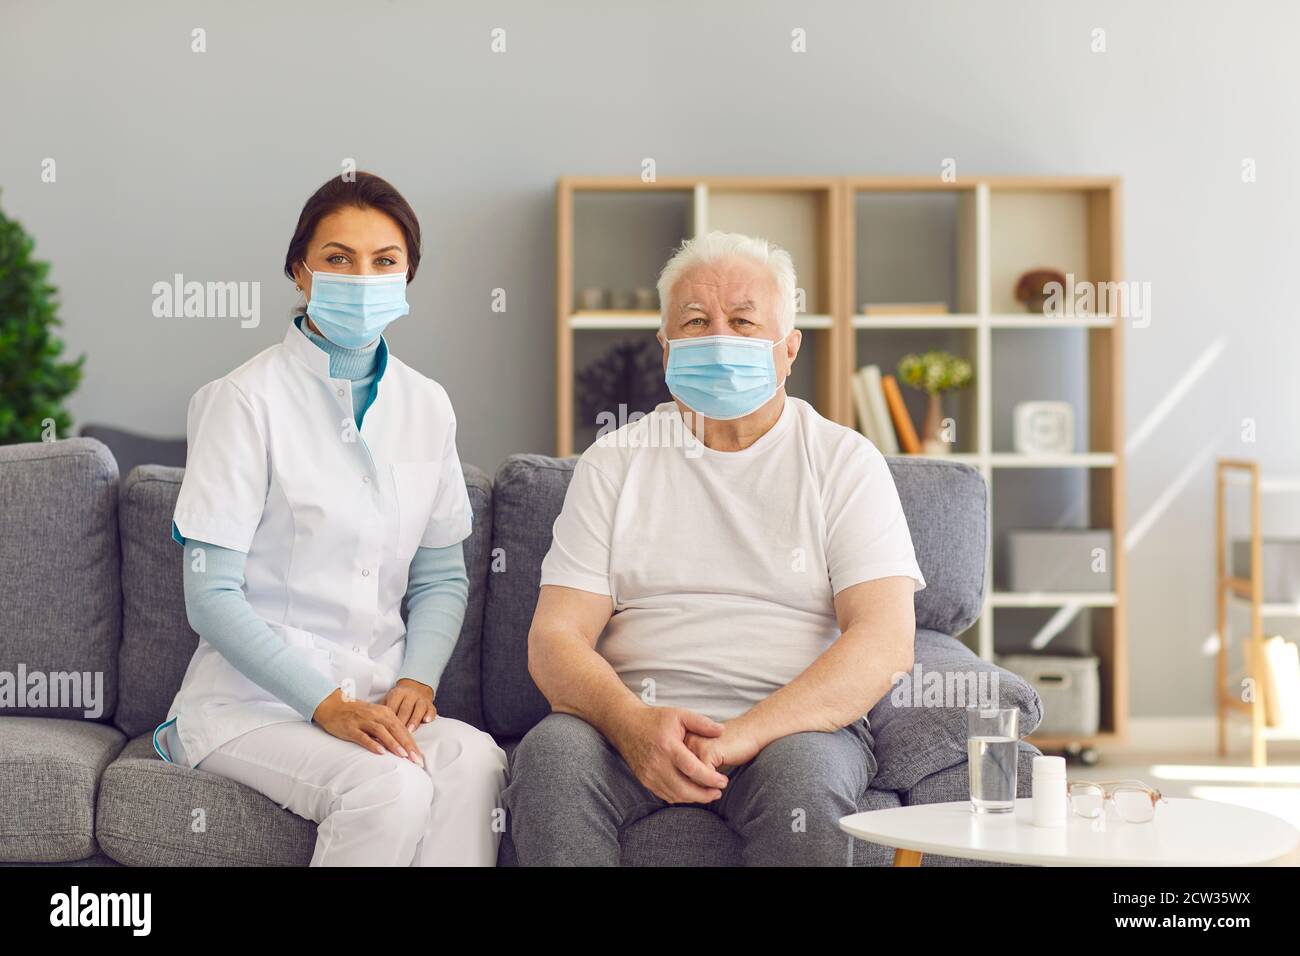 Portrait of therapeutist and aged white-haired man, both wearing medical face masks, sitting on couch at home. Stock Photo